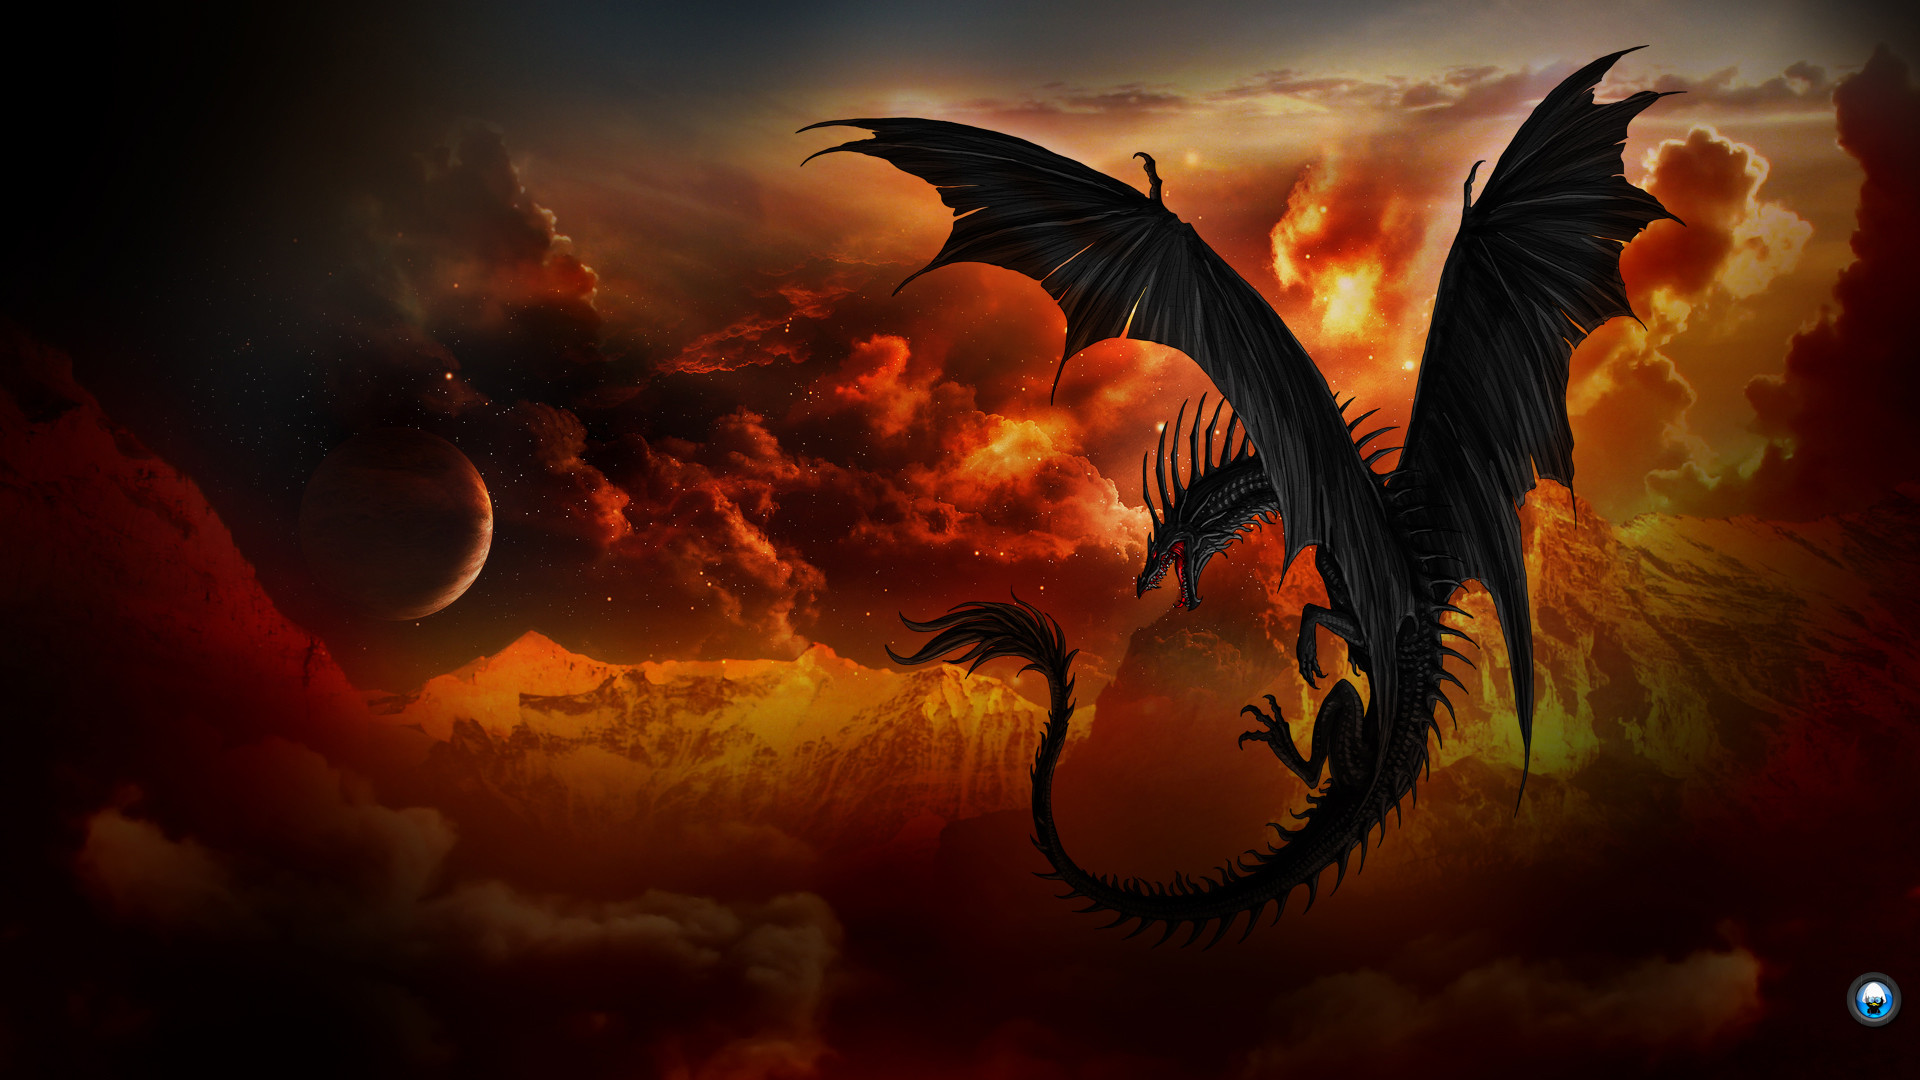 1920x1080 Download Free Lovely Dragon Wallpapers HD images